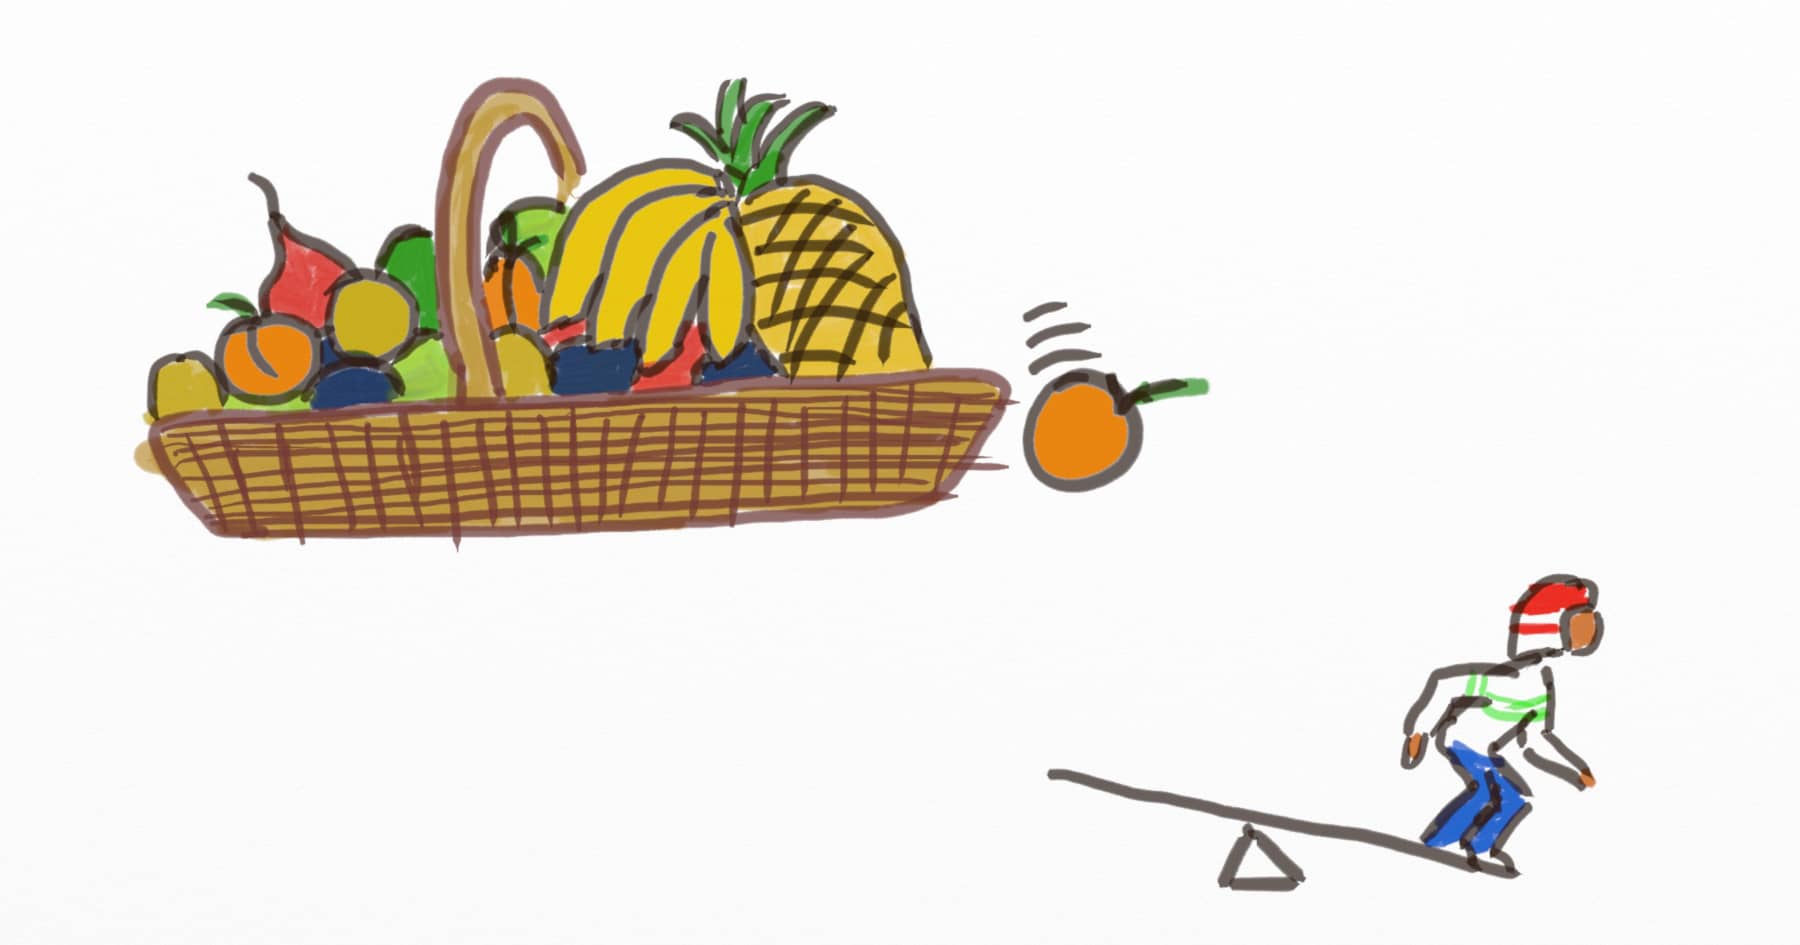 Drawing of a guy on a catapult, waiting for a giant fruit to fall from a fruit basket to propel him in the air. A fruit basket at work resulted in an unexpected productivity increase.